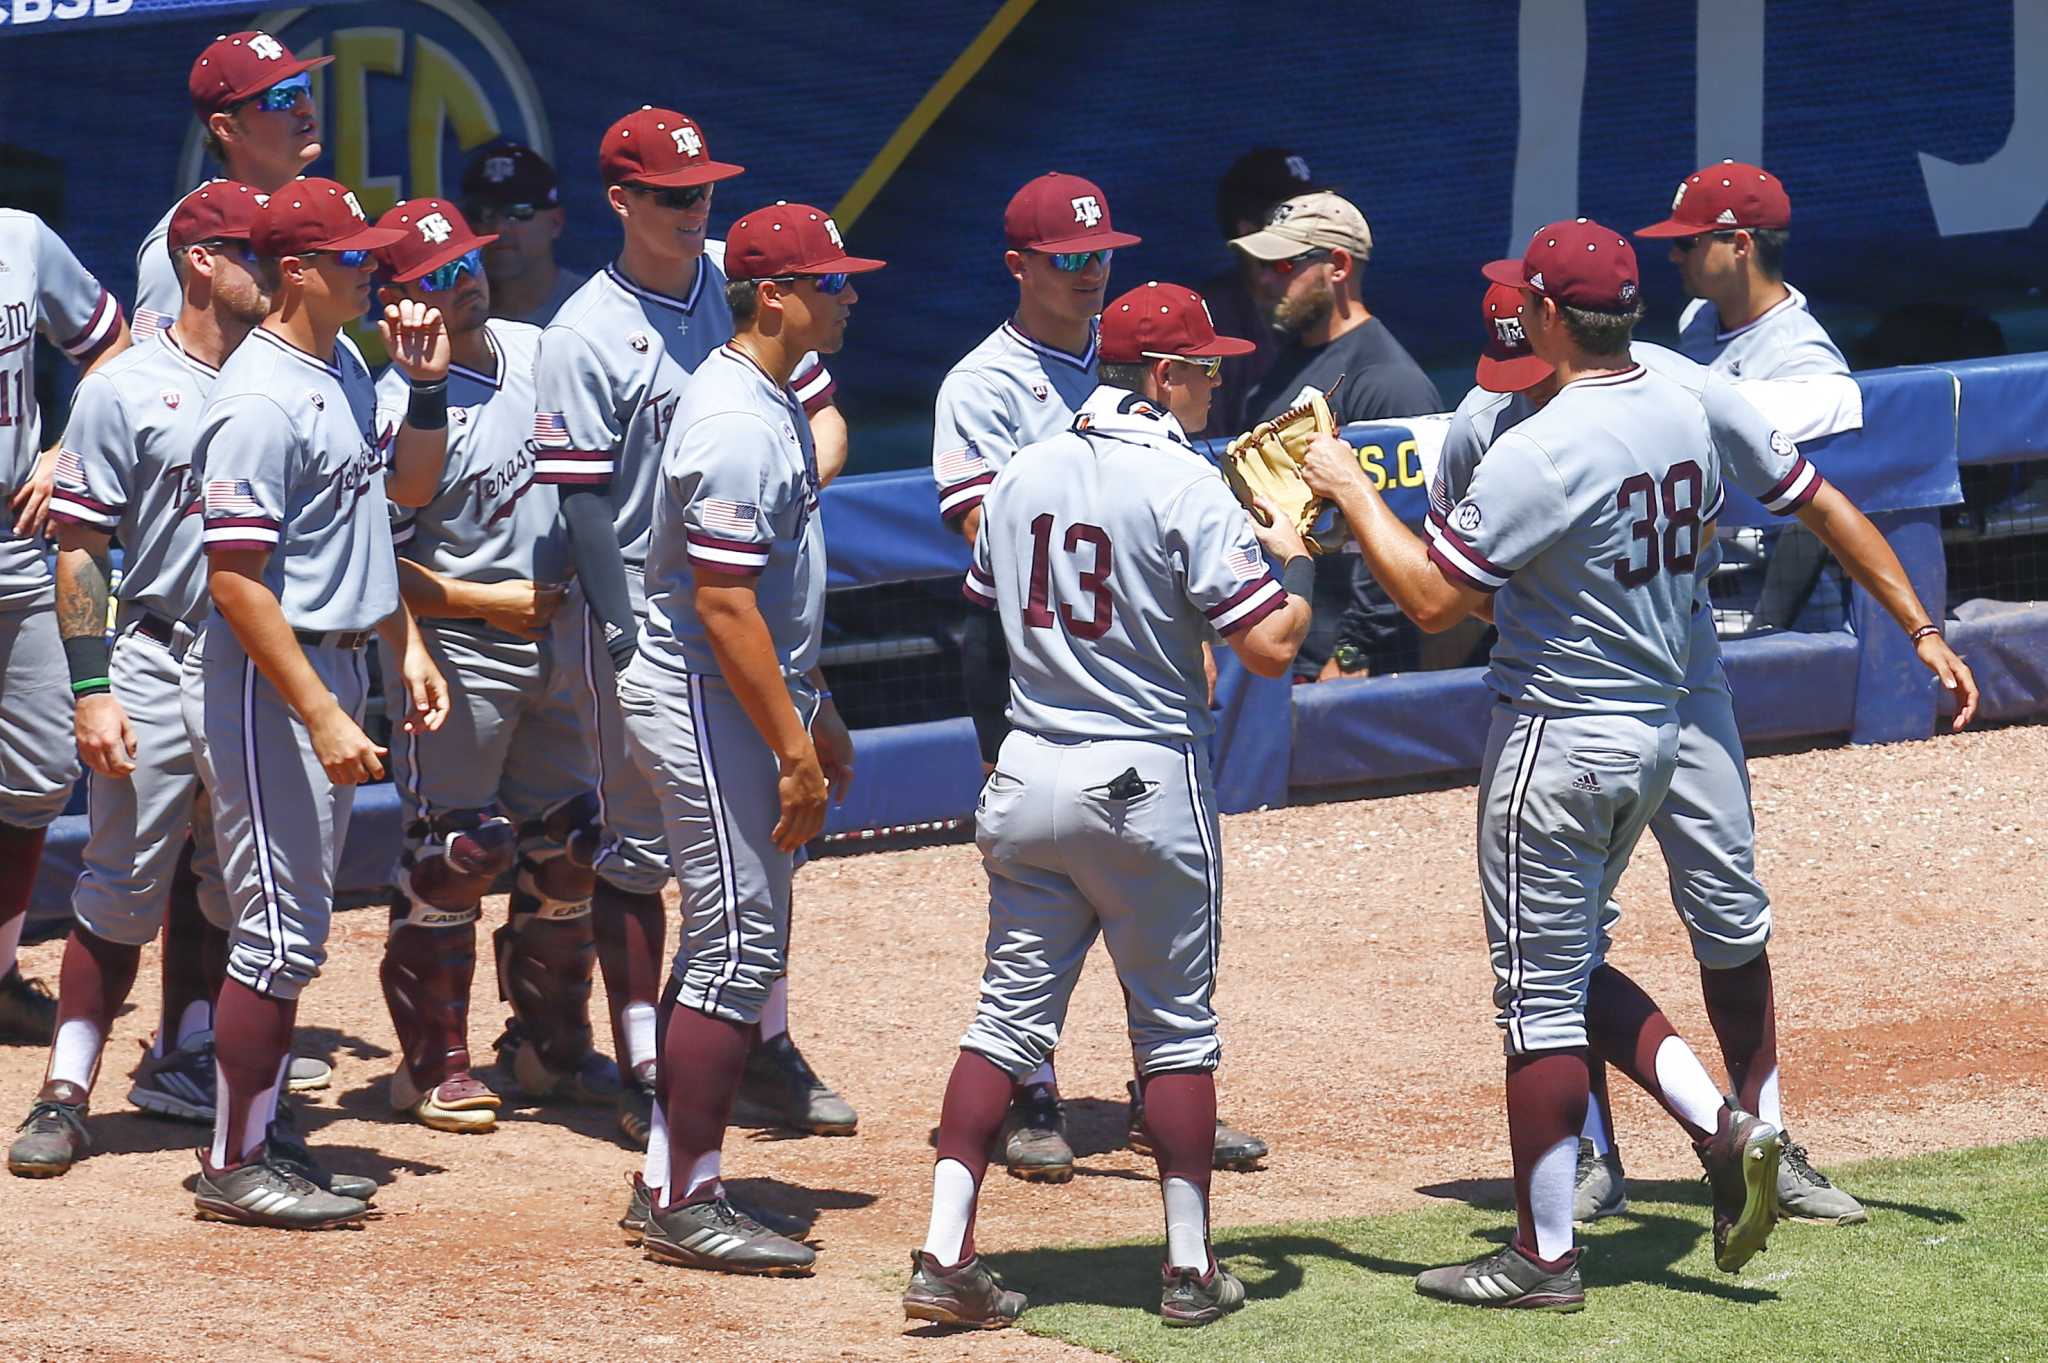 Aggies’ baseball schedule includes Texas, UH, Rice